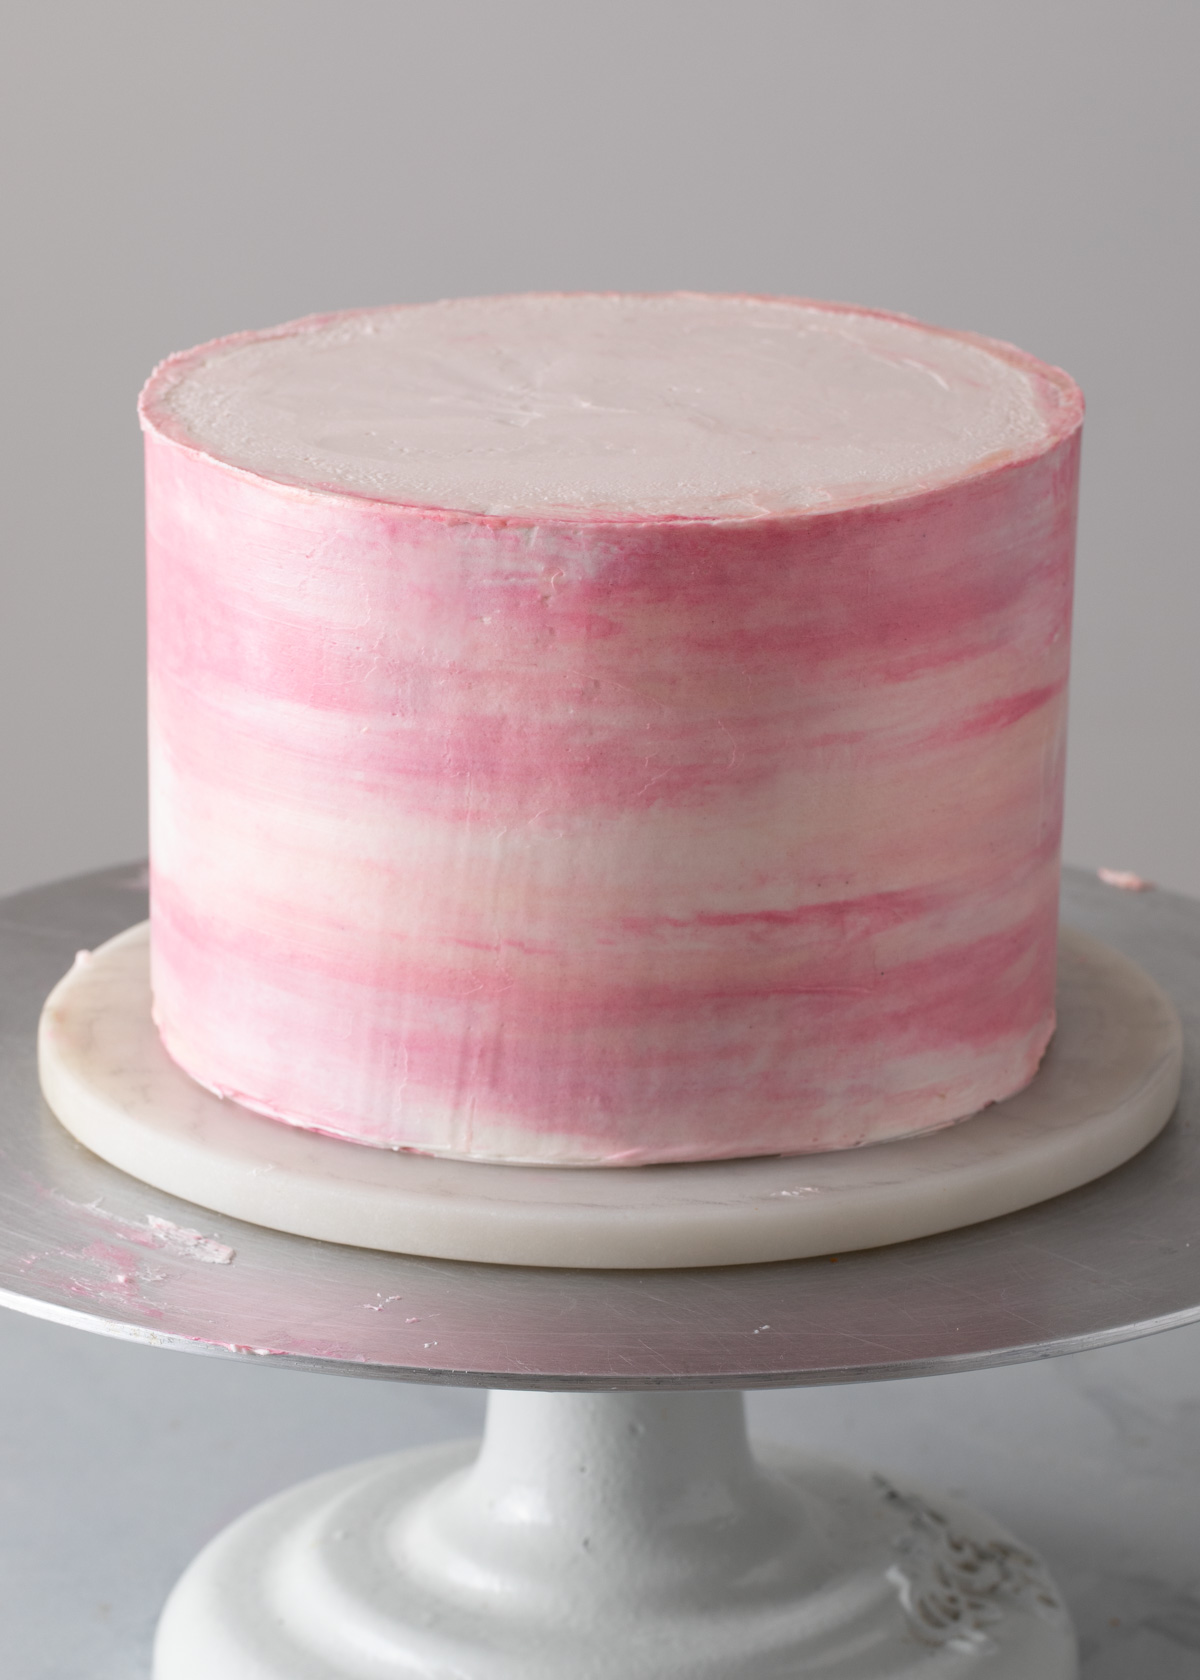 A pink buttercream watercolor cake with smooth icing